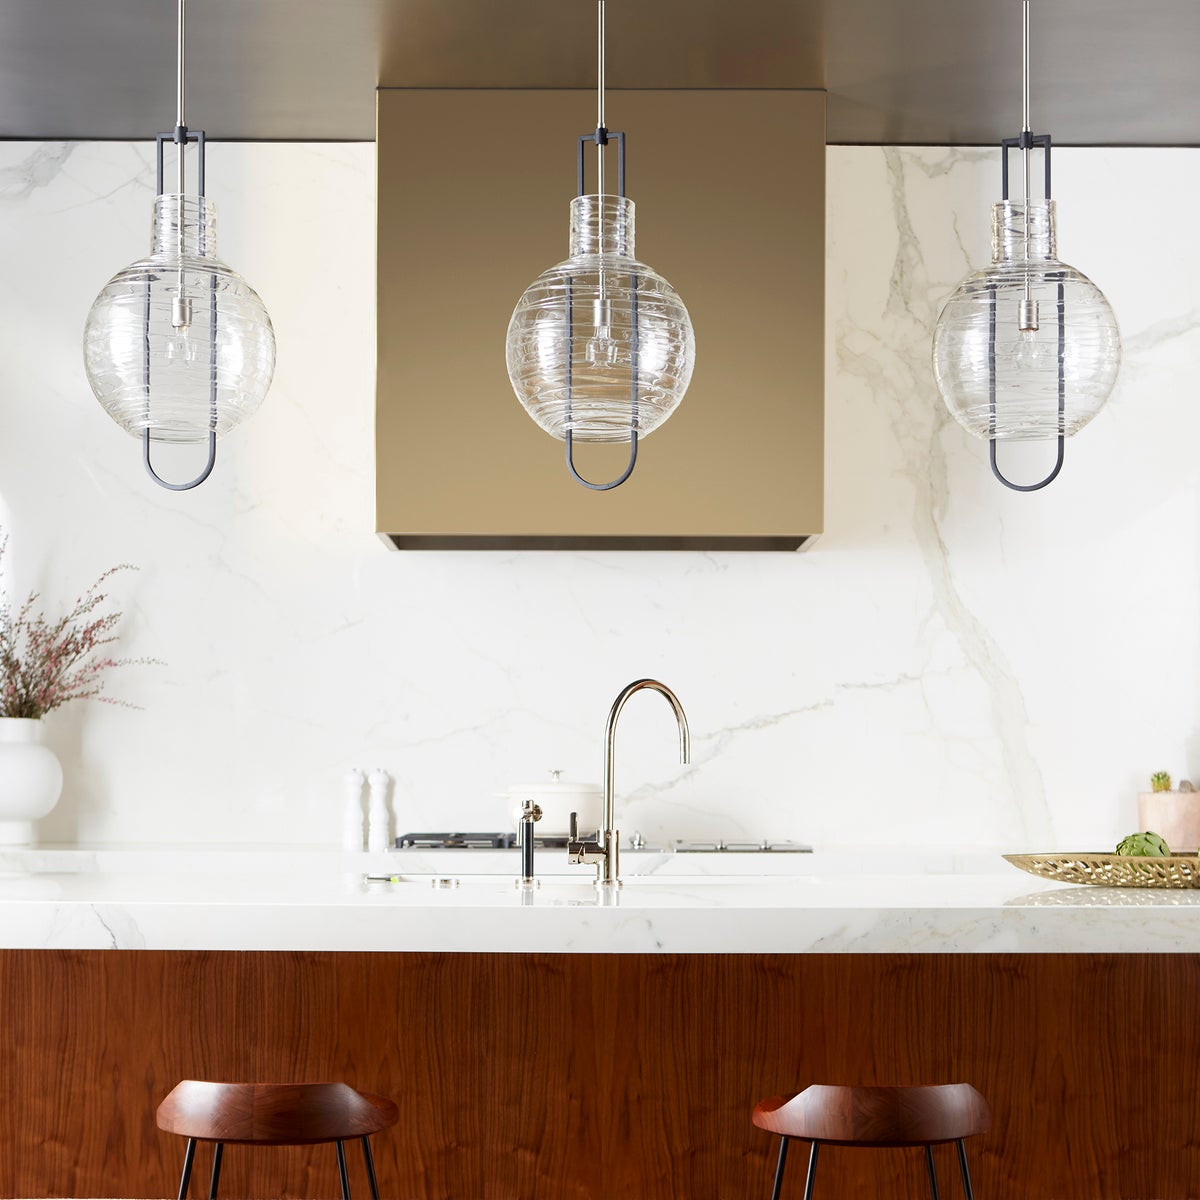 Globe Pendant Light with blown clear textured glass shade and two-toned noir/satin nickel finishes. Dual chain and stem hanging system for adjustable height. Enhance your kitchen, bedroom, or bathroom with this contemporary-chic lighting fixture.